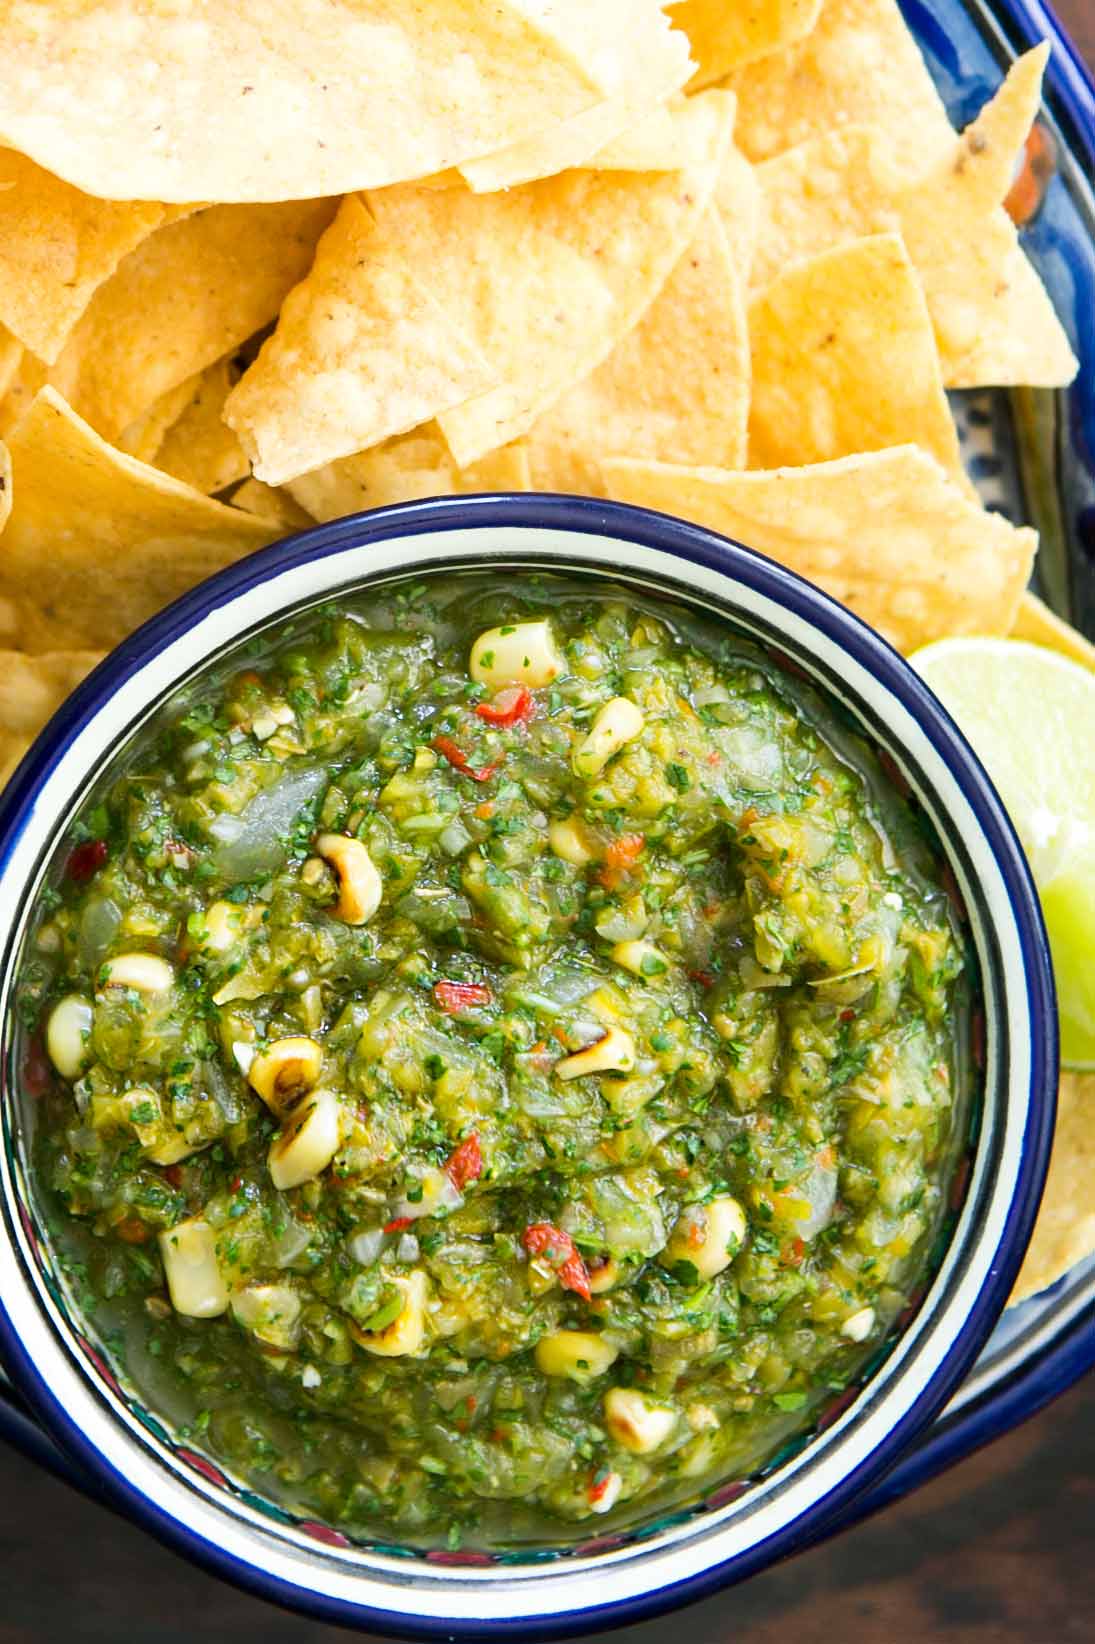 Cactus & Corn Salsa from Simply Recipes